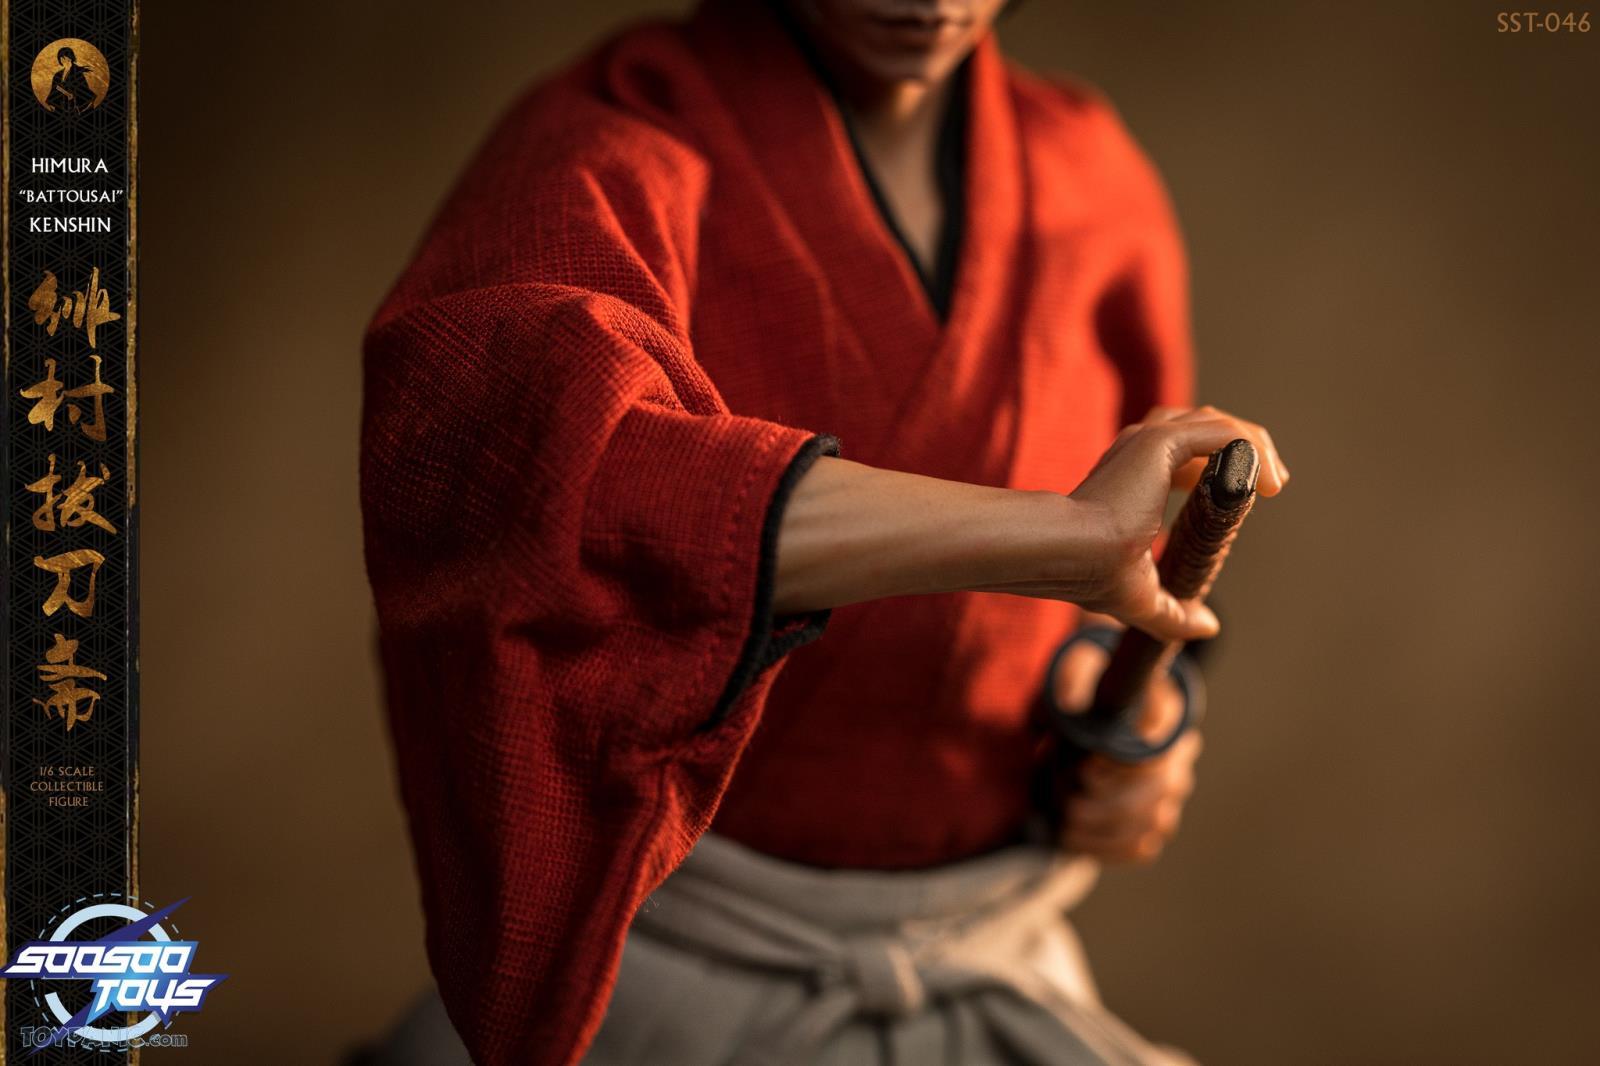 NEW PRODUCT: 1/6 scale Rurouni Kenshin Collectible Figure from SooSooToys 712202251230PM_4333714